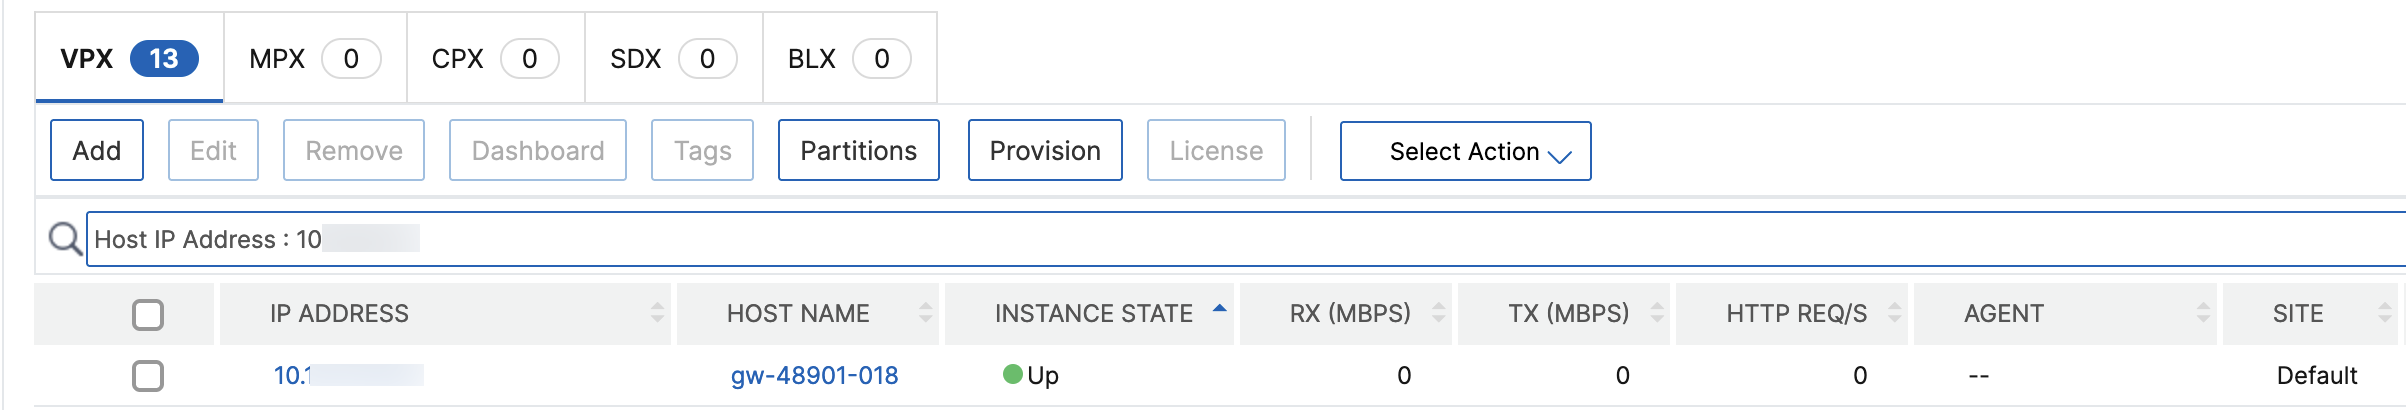 View provisioned VPX instance